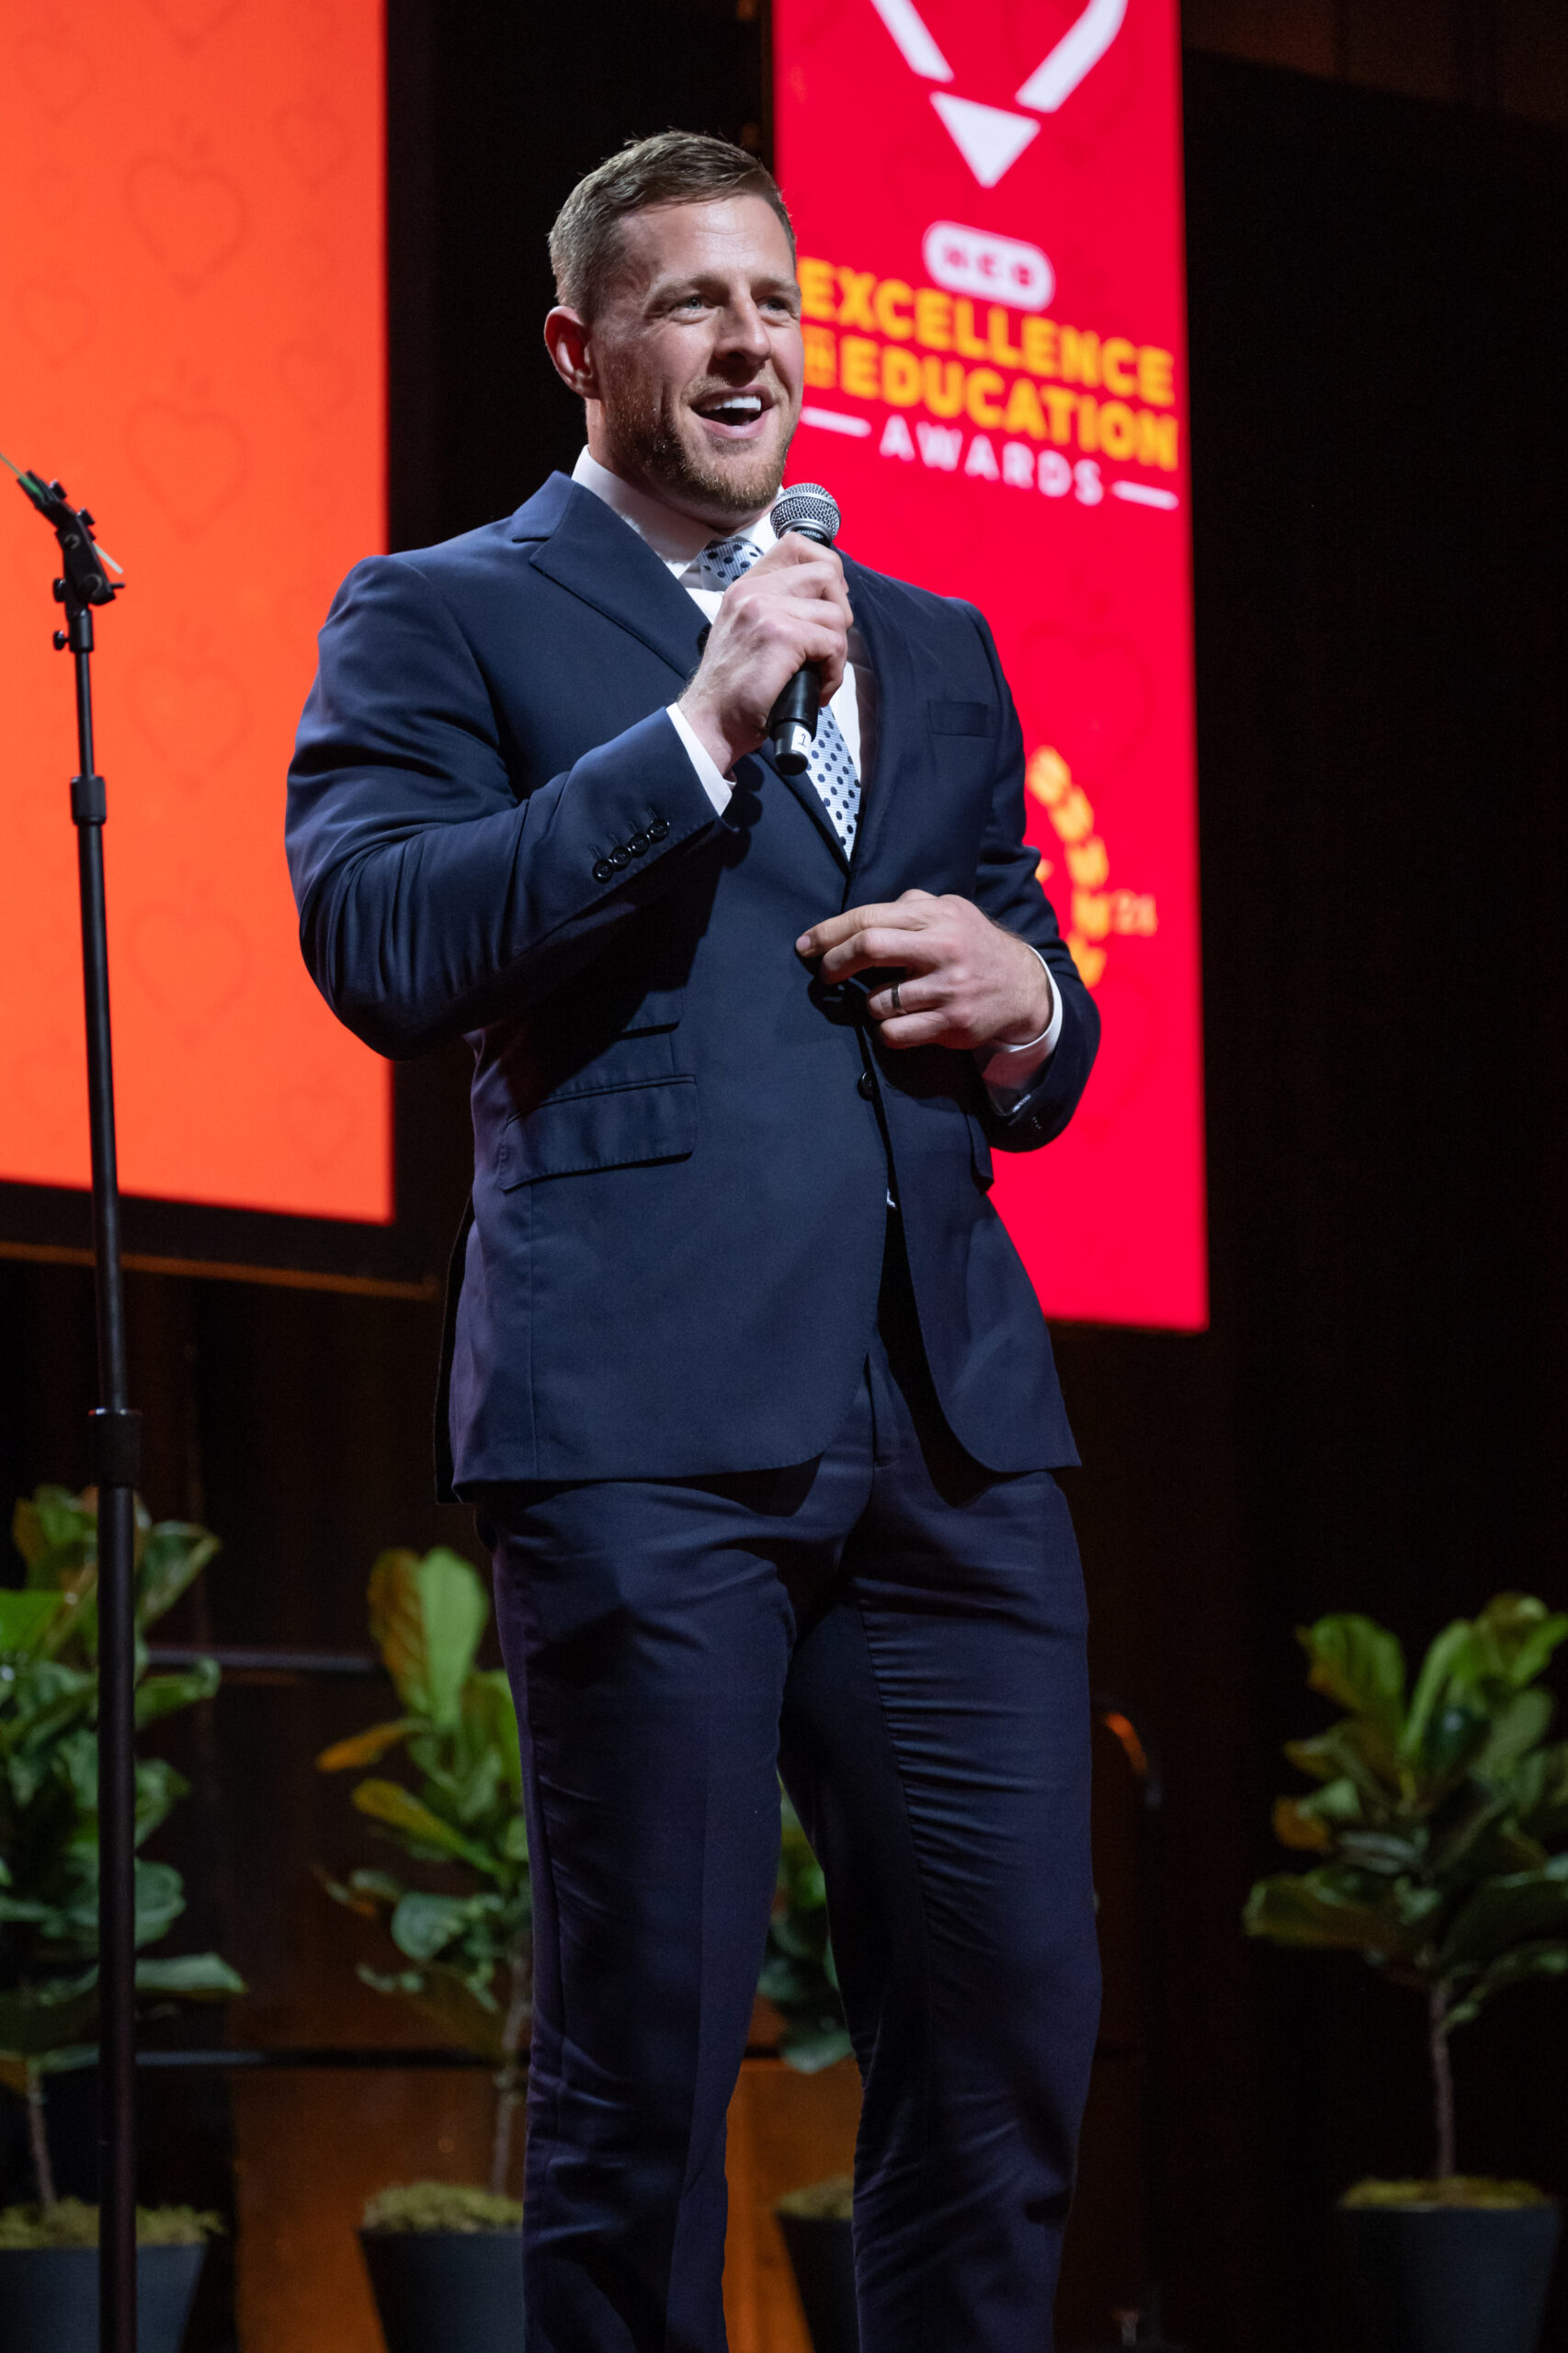 2024 H-E-B Excellence in Education Awards, May 5, 2024 in Houston, Texas. (Darren Abate for H-E-B)